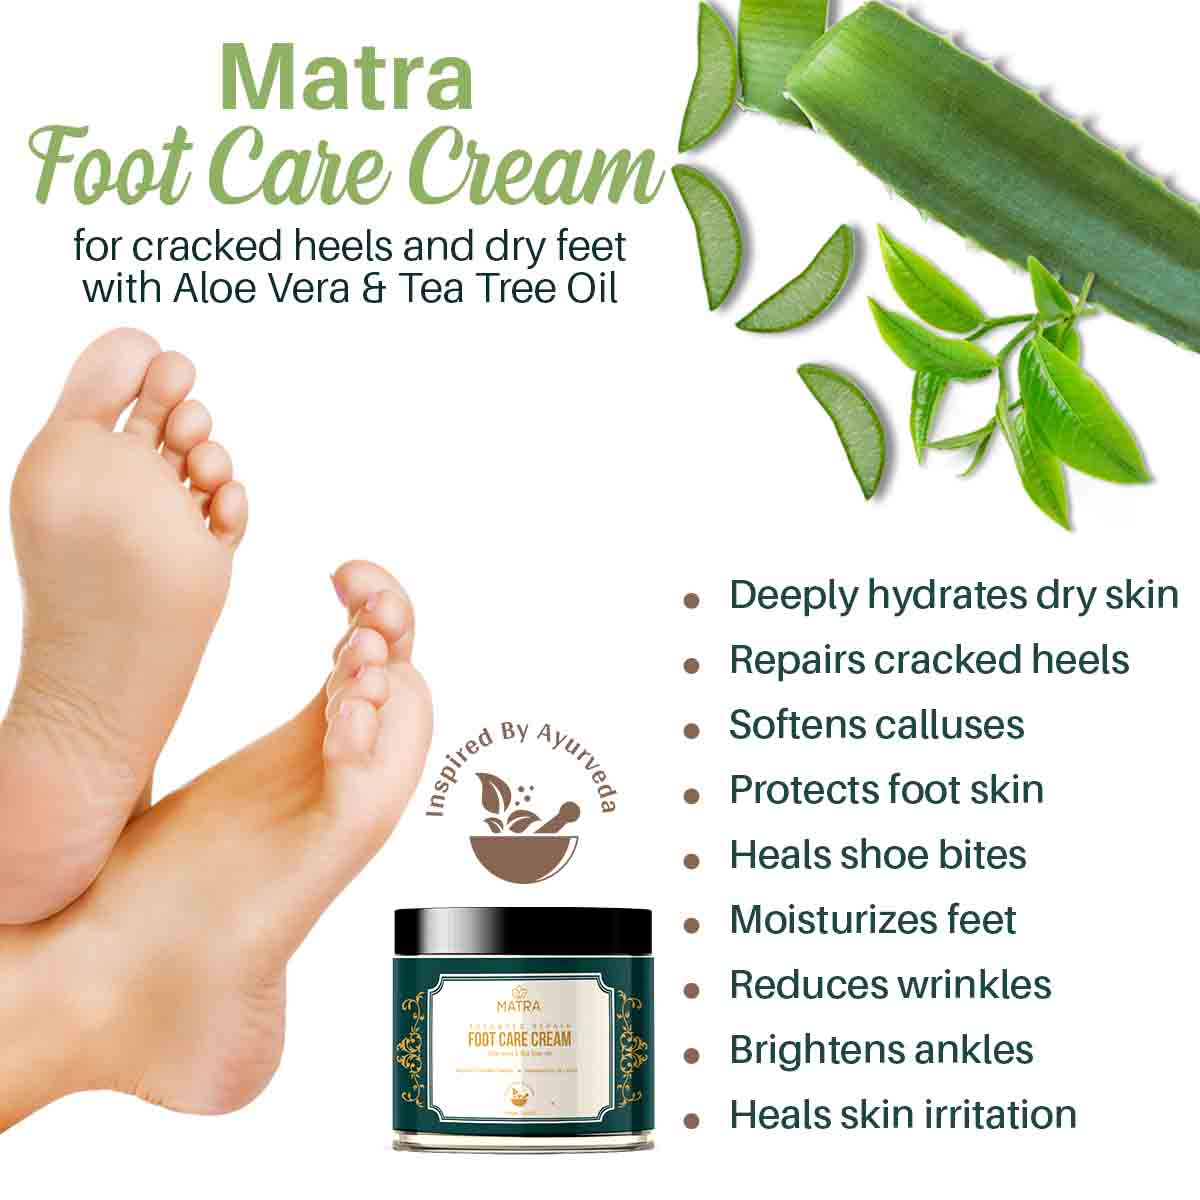 Amazon customers love this foot cream for dry, cracked skin